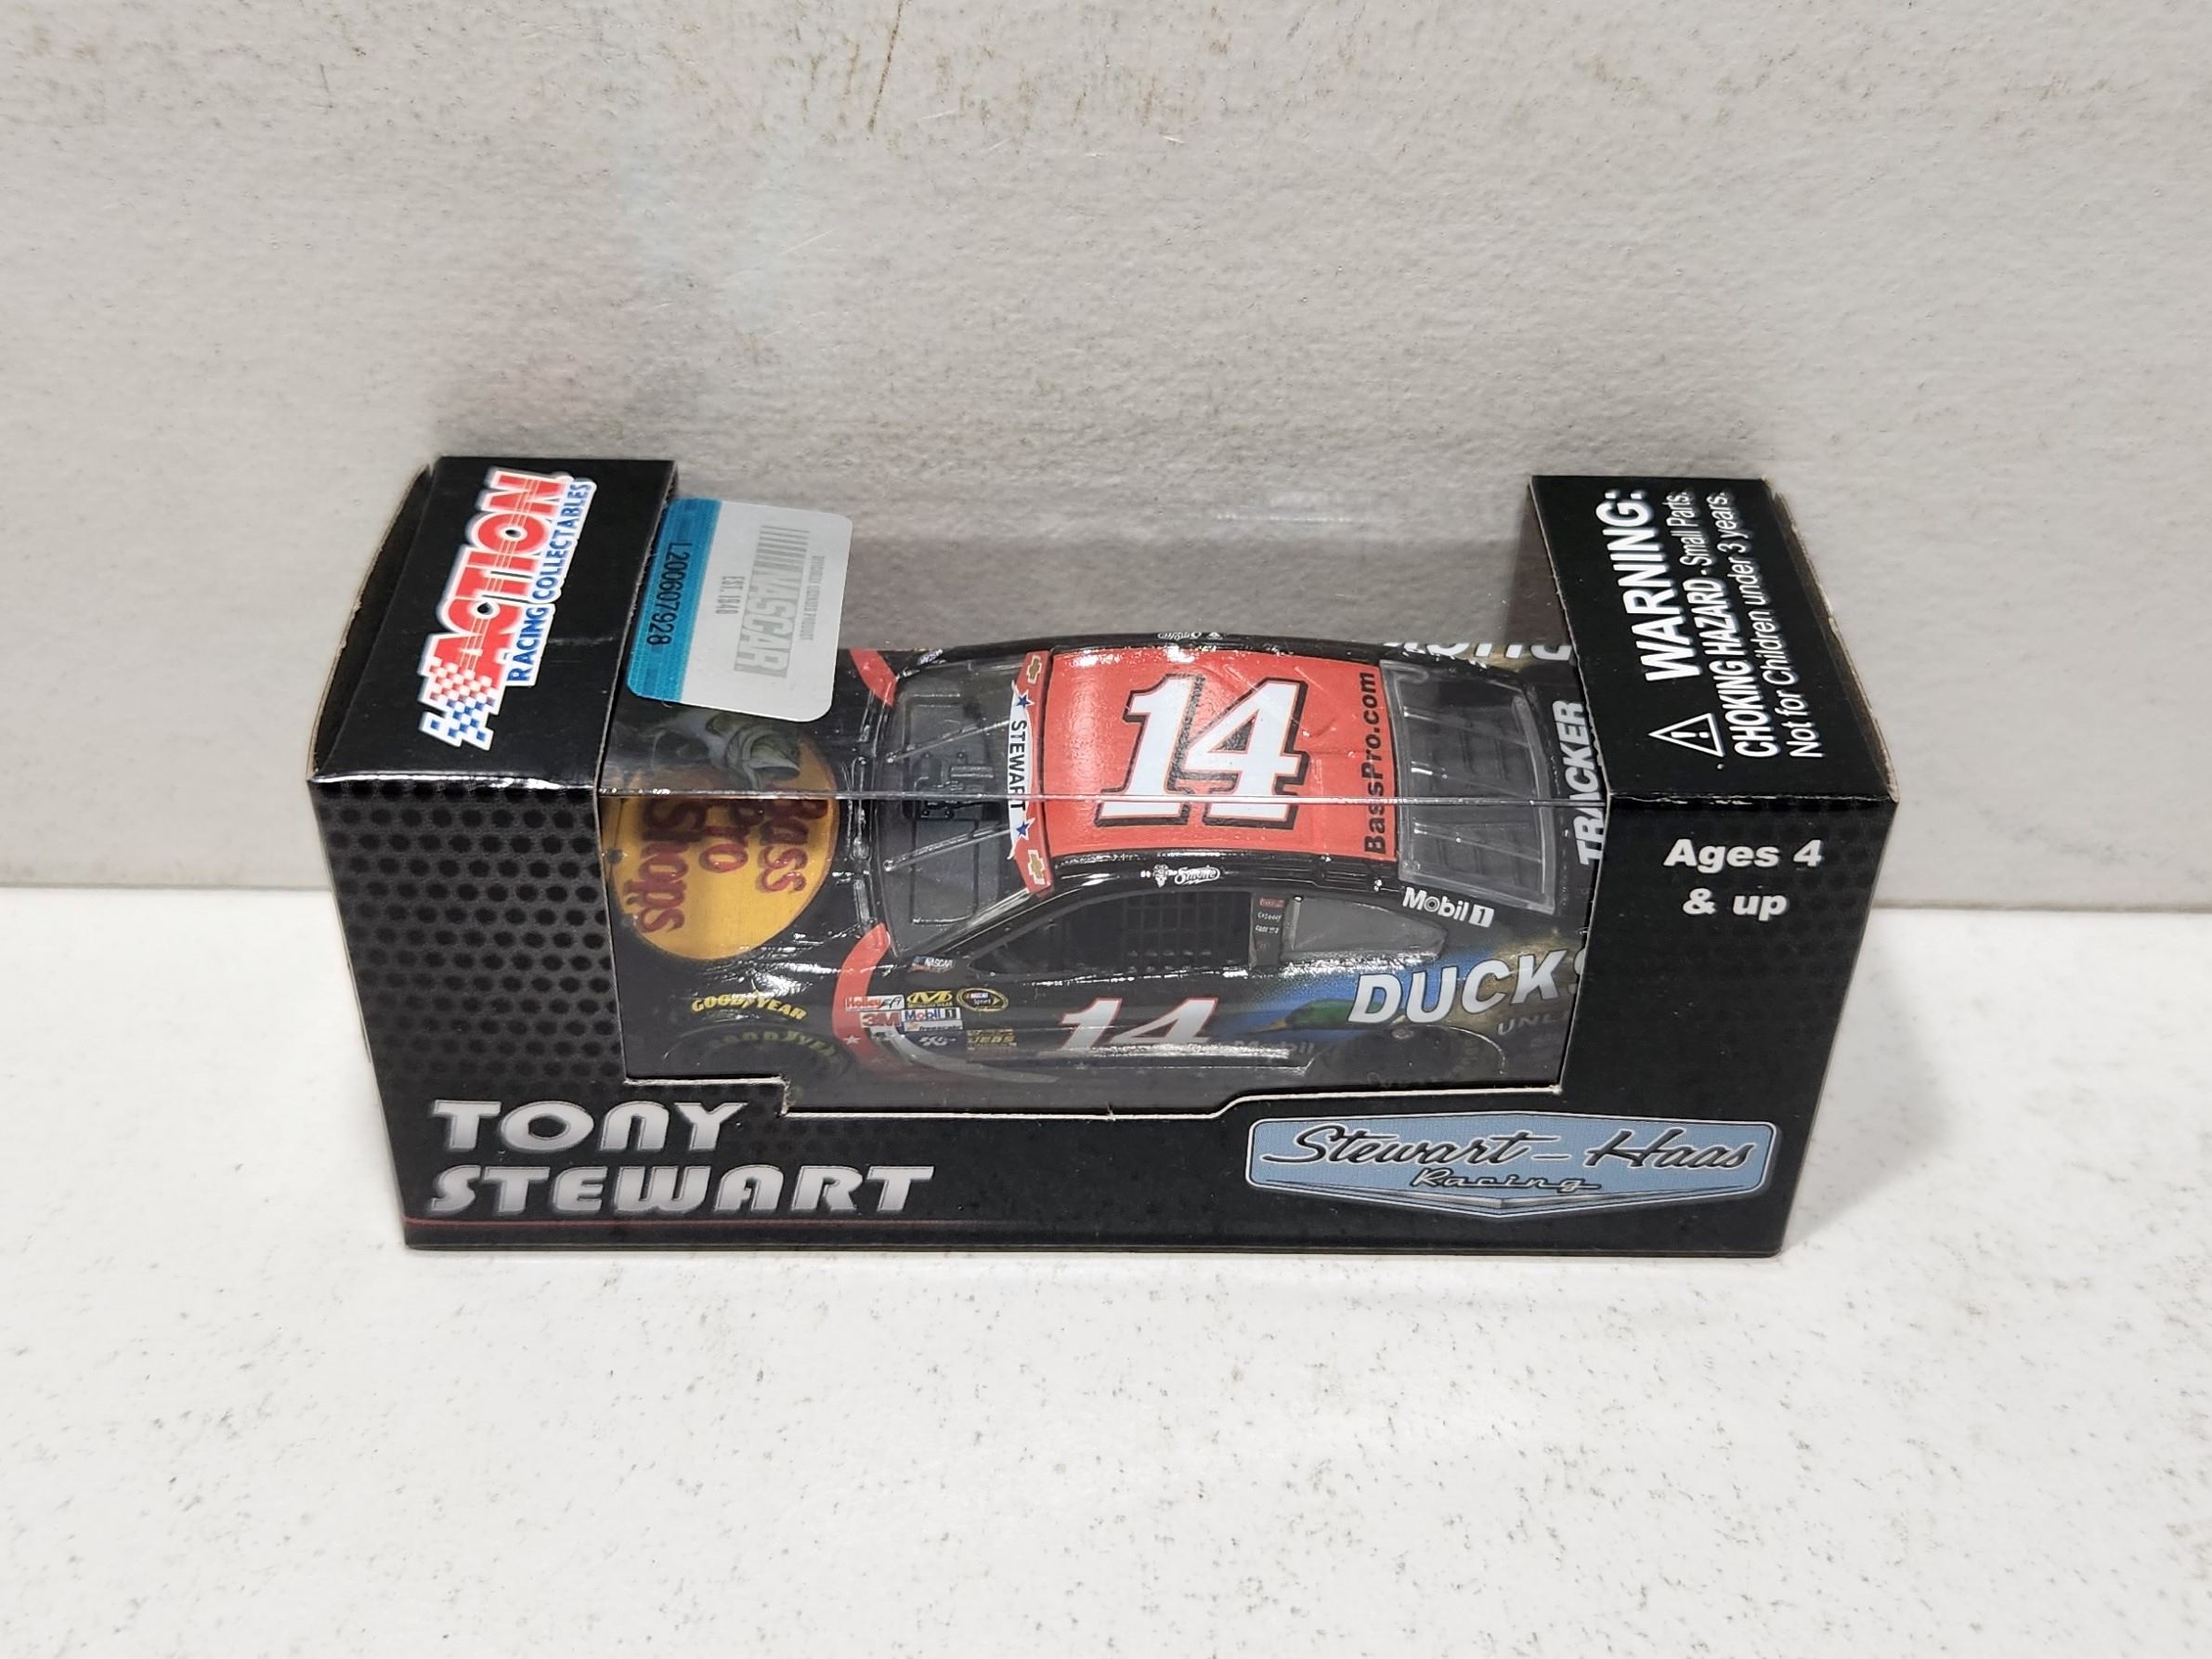 2014 Tony Stewart 1/64th Bass Pro Shops "Ducks Unlimited" Pitstop Series Chevrolet SS